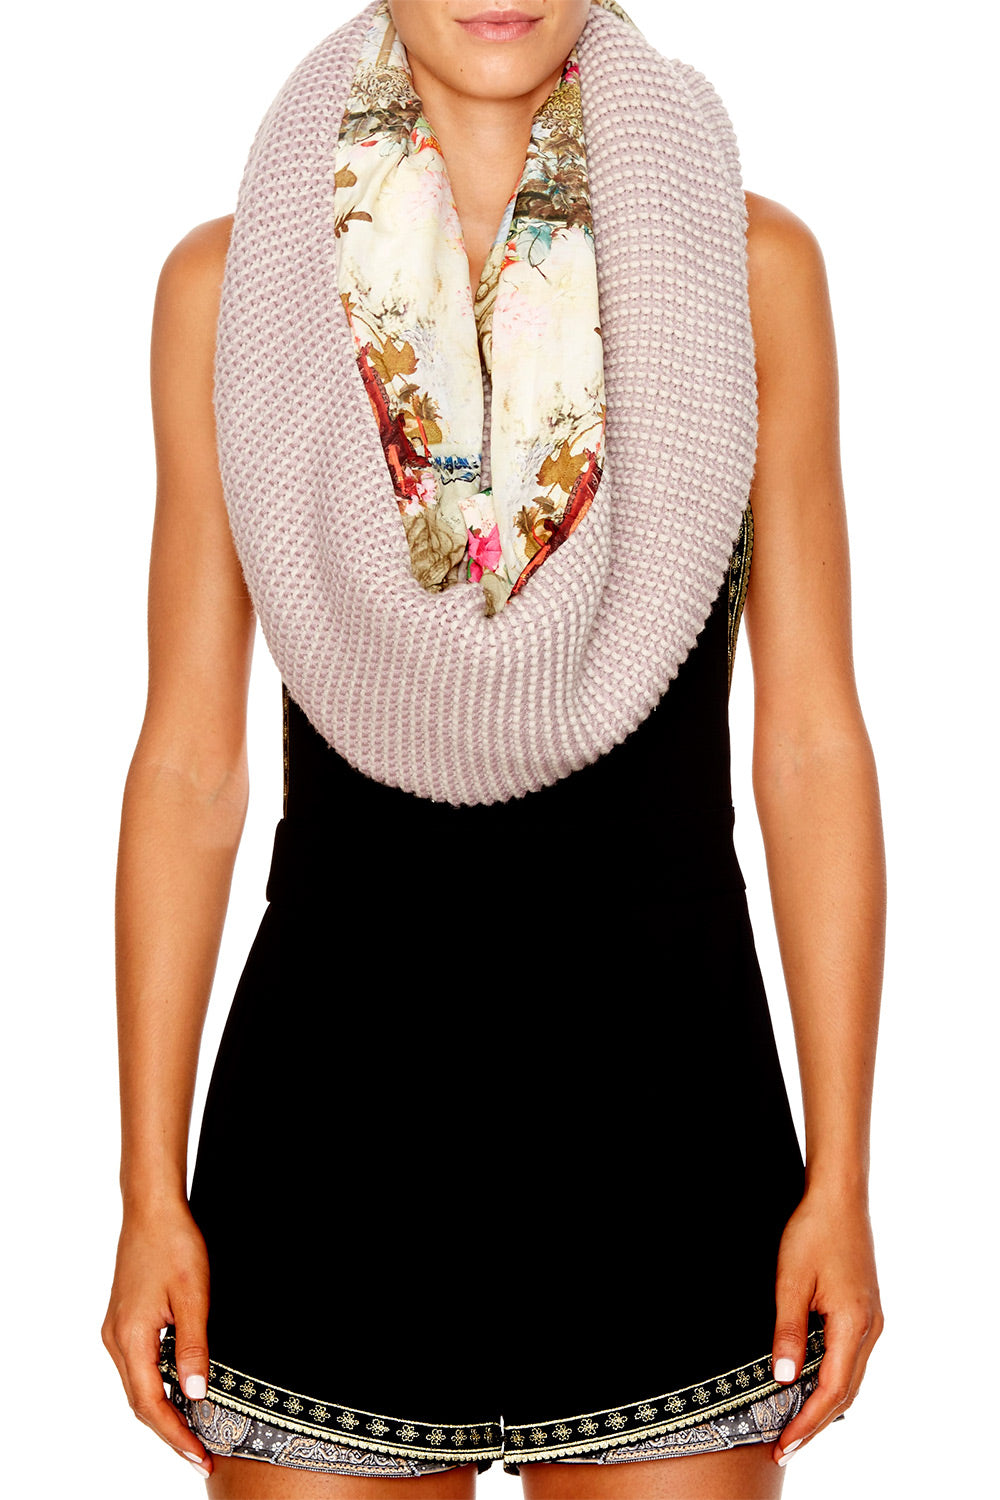 GIRL IN THE GARDEN DOUBLE SIDED SCARF